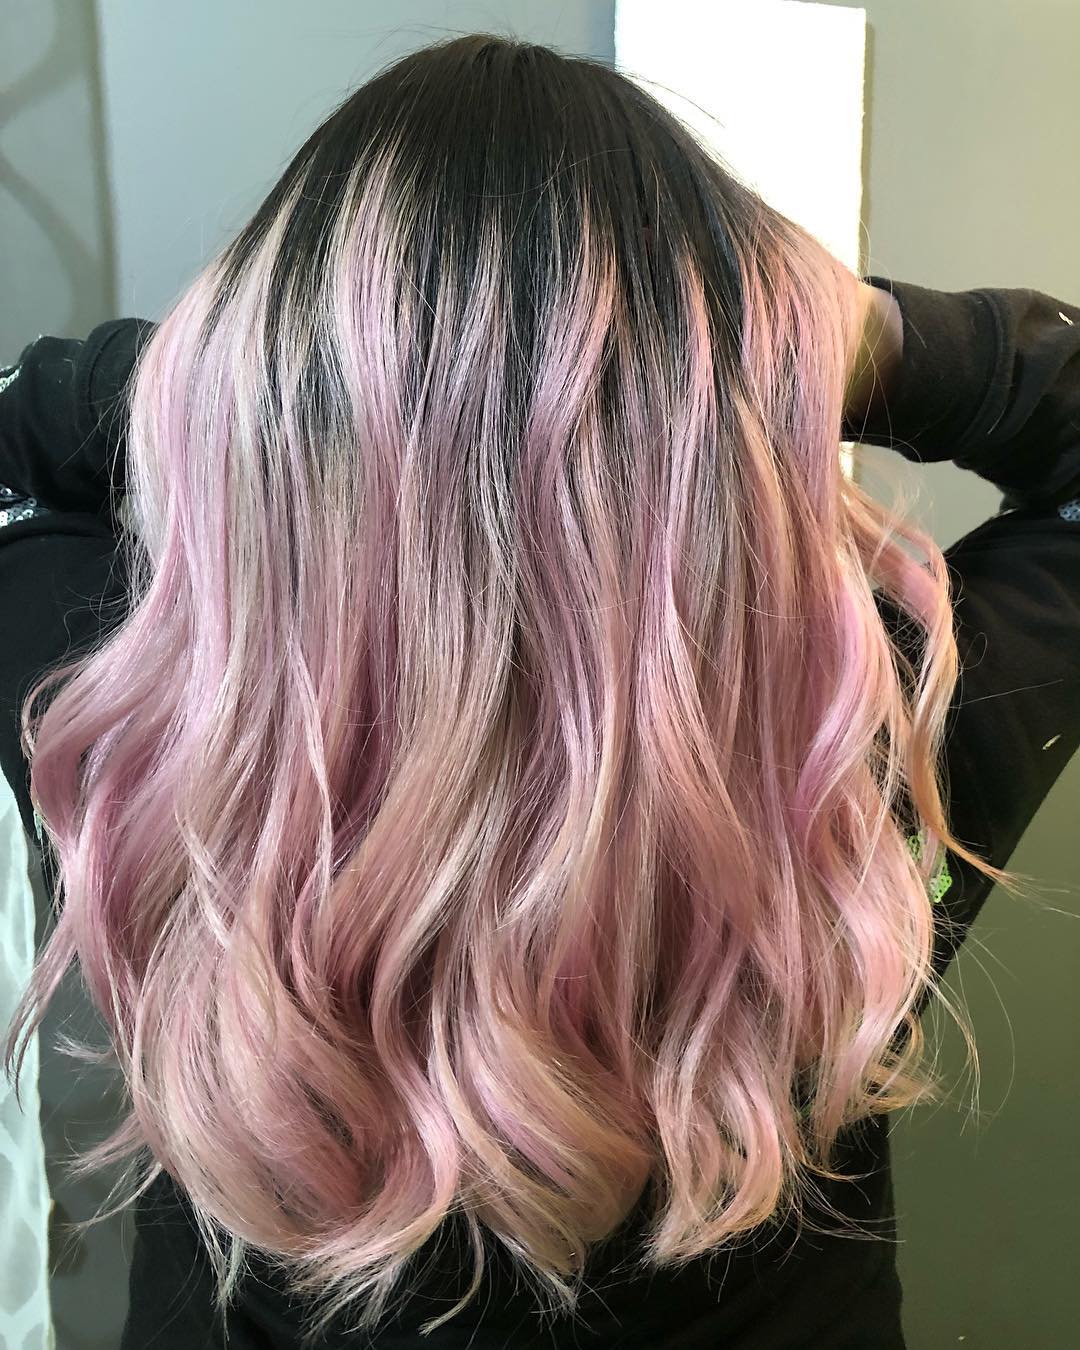 Black and Light Pink